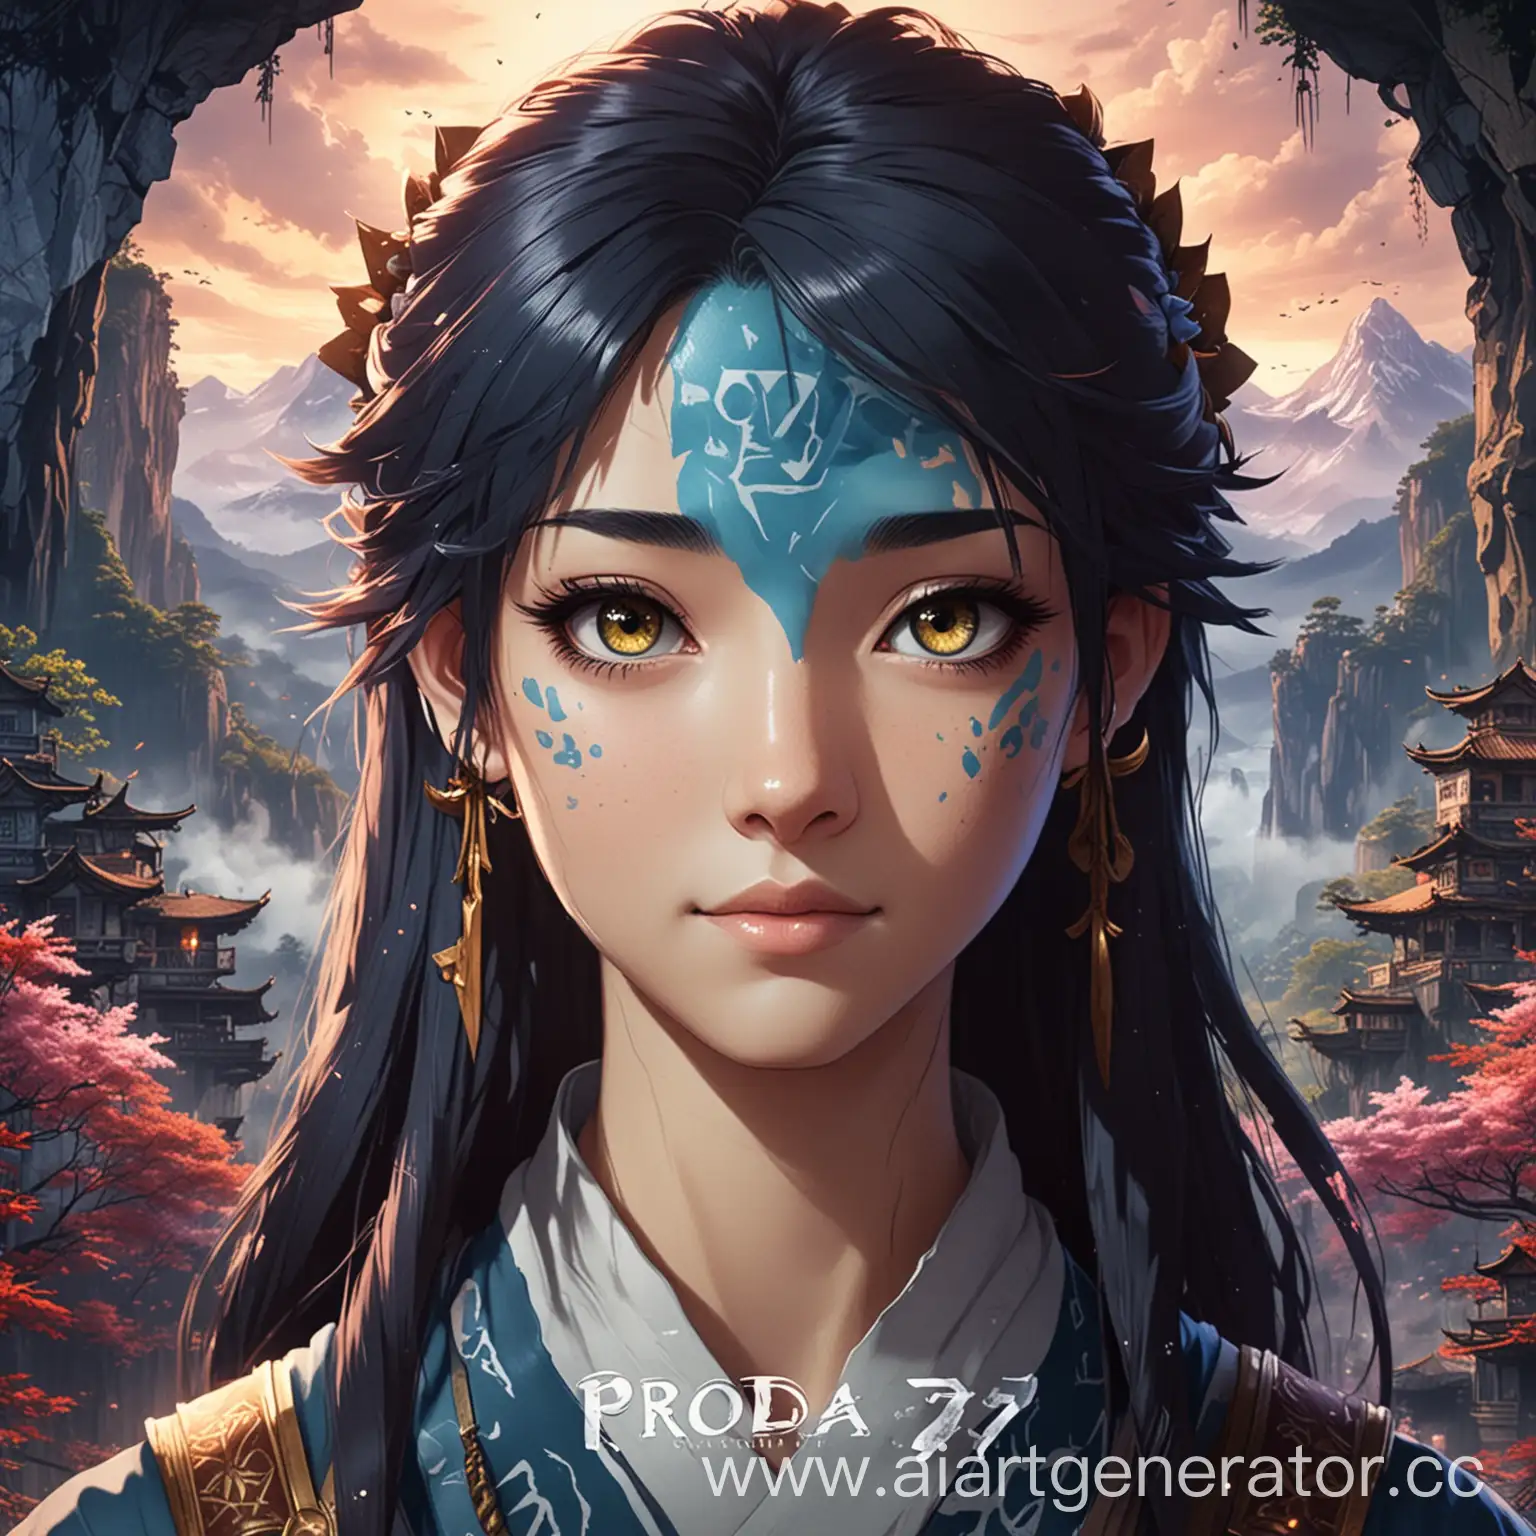 Anime-Style-Avatar-with-Proda77-Inscription-in-Beautiful-Background